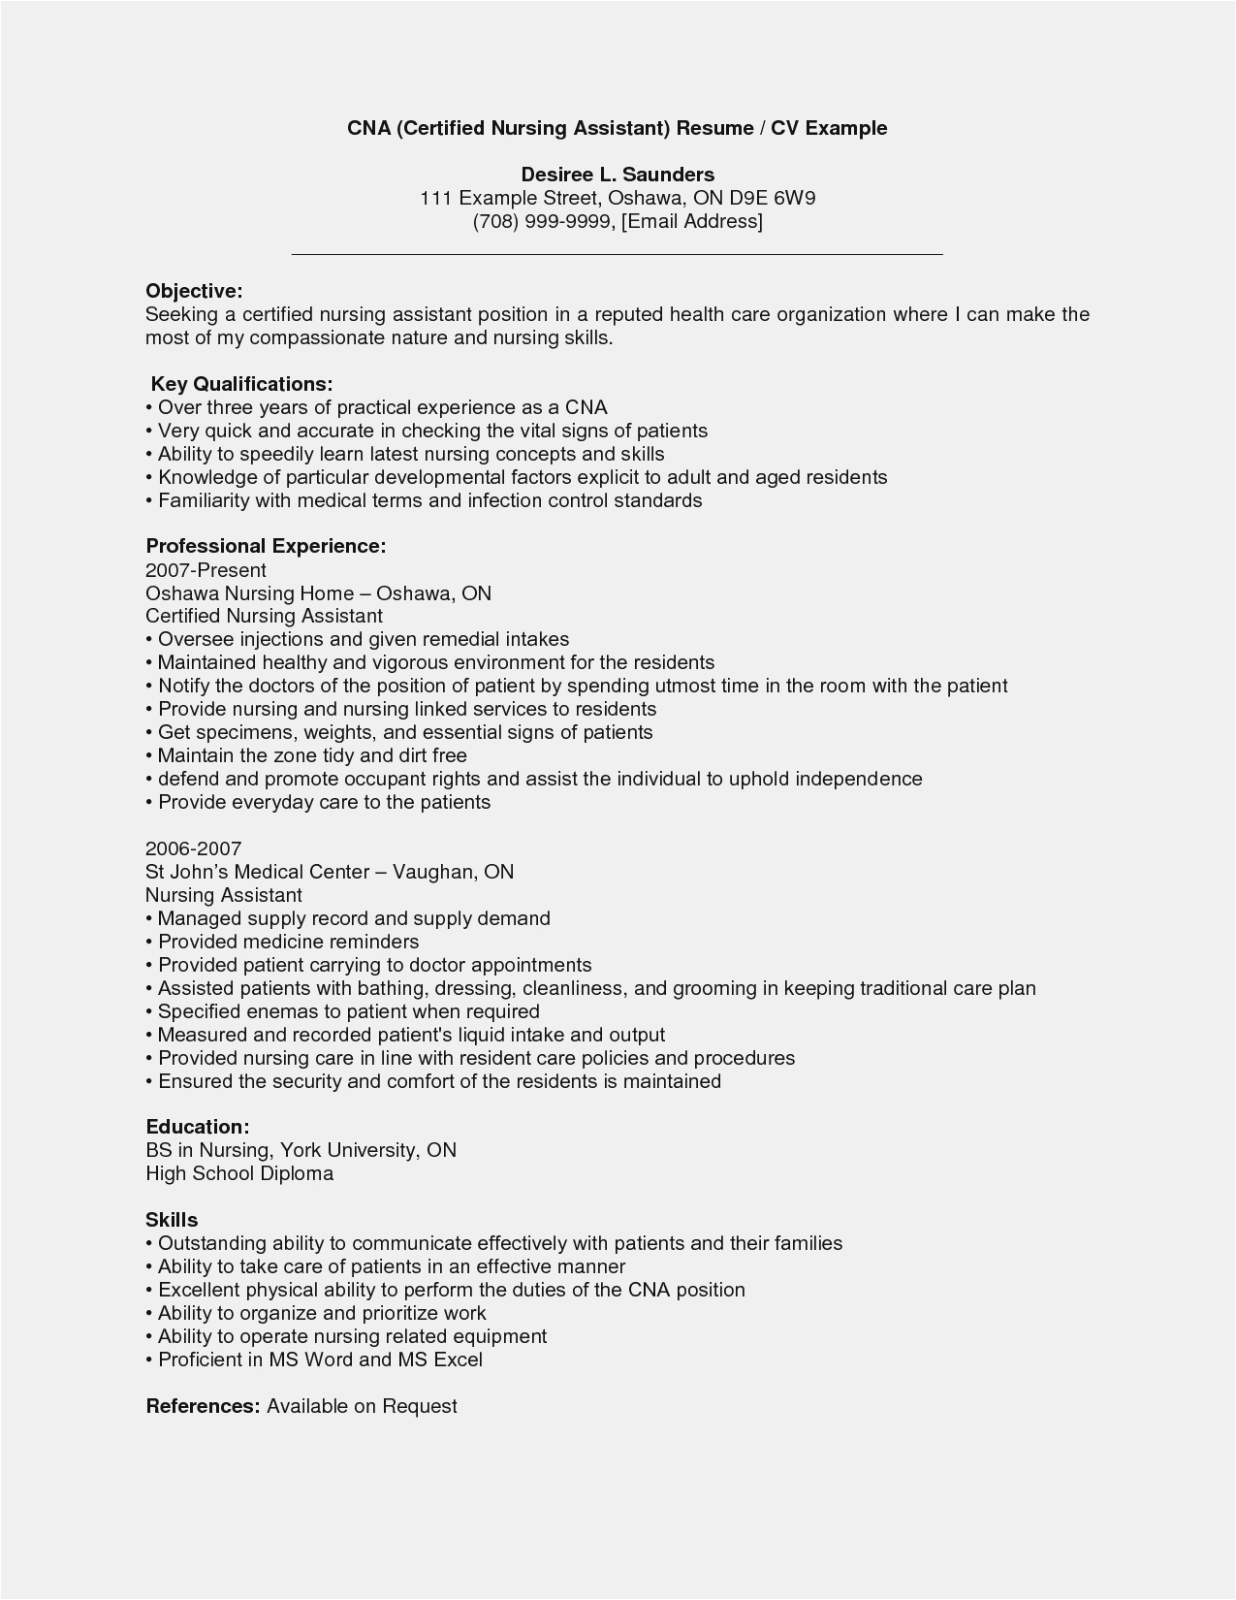 Certified Nursing assistant Resume Sample with Experience top 15 Trends In Resume